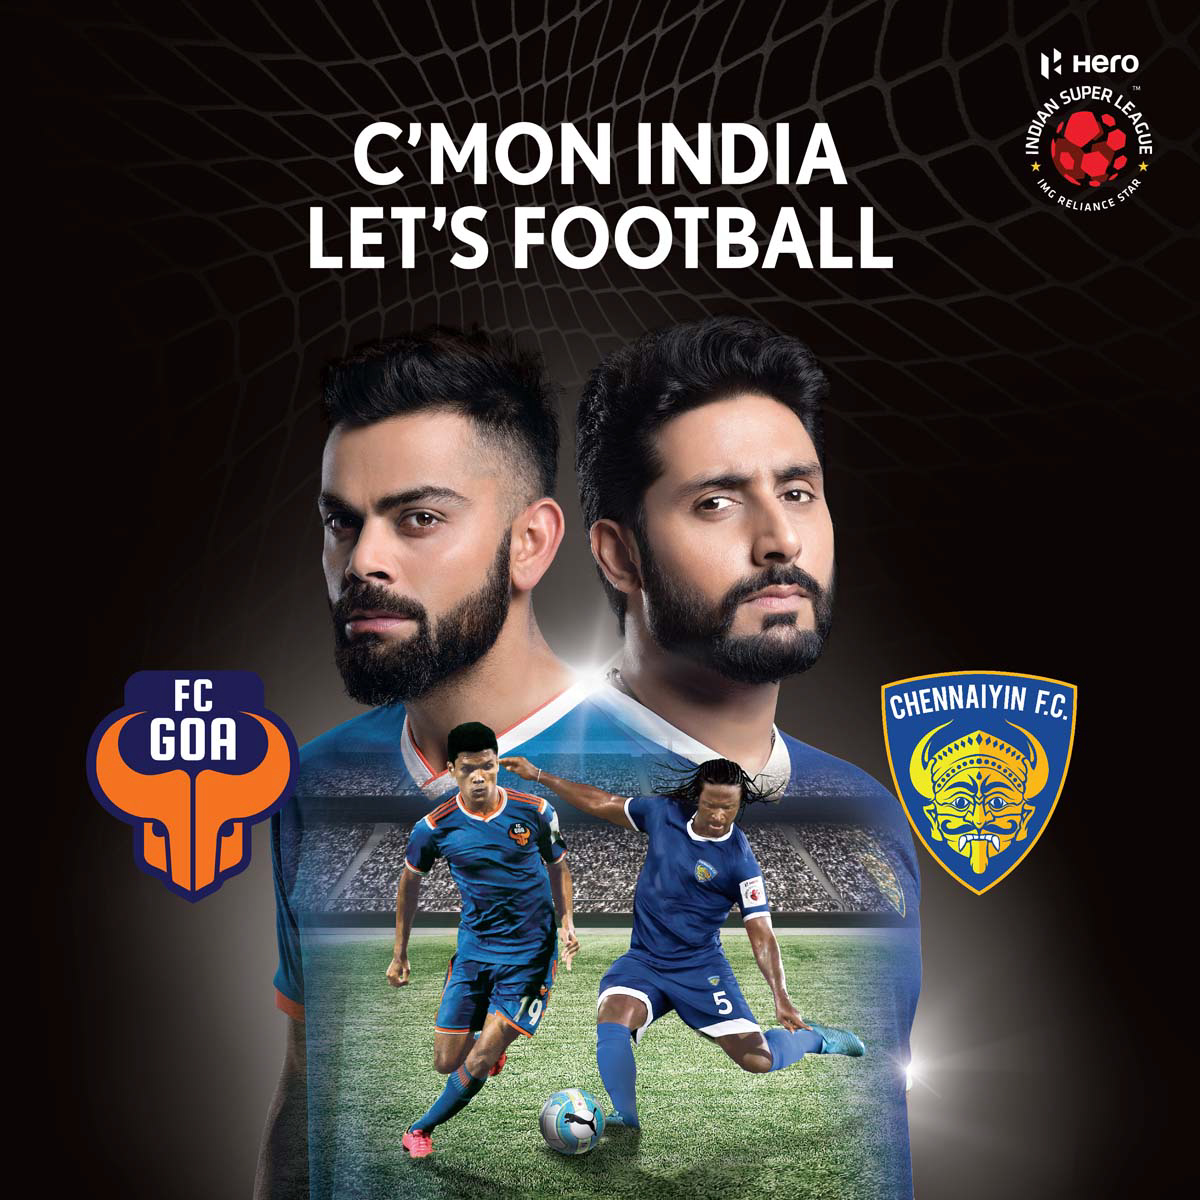 Indian Super League, Football League,Sport Photography, Crickerter Photoshoot, Shooting with Celebrity, Sport Photographer, Passionate, Football, Sports, Commissioned Photography, Best Advertising Photographer by Vikram Bawa, Mumbai, India